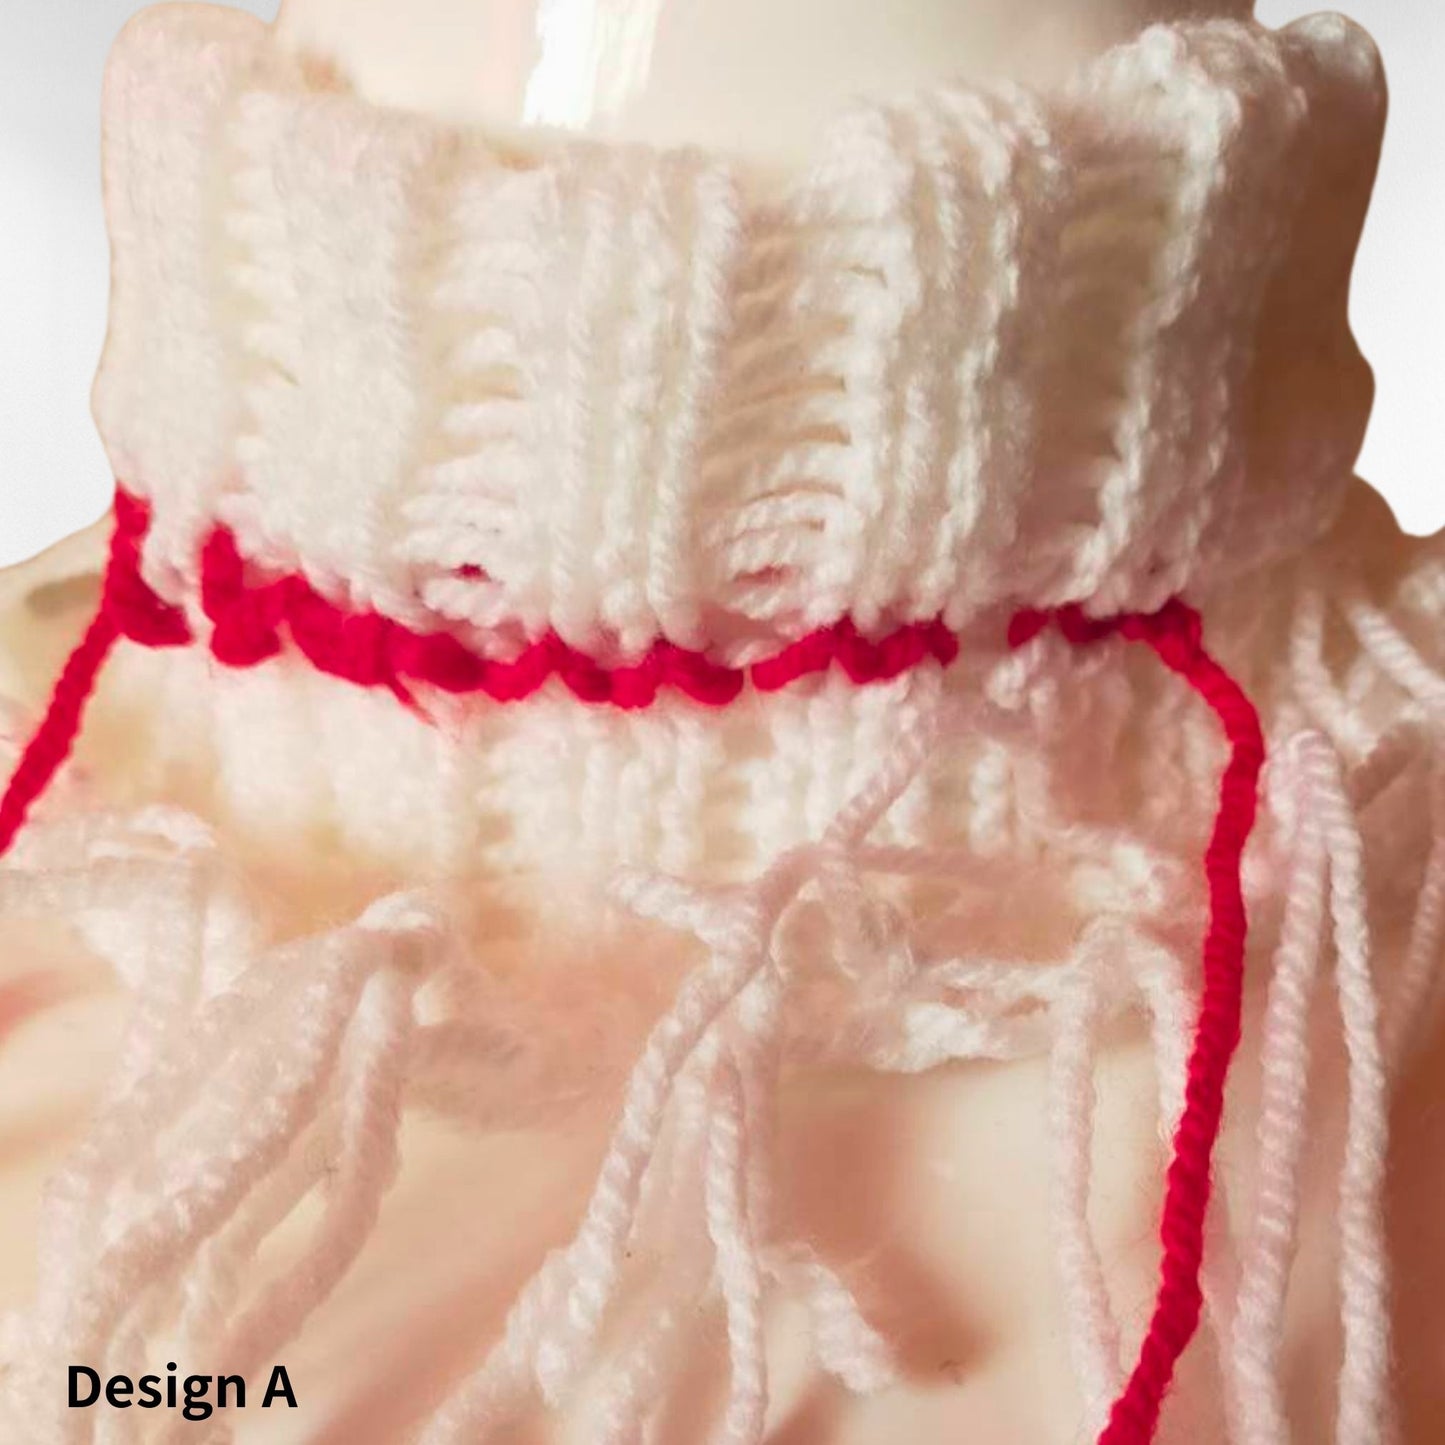 Red Drip " Handmade Knitted Choker Neck Accessory White and Red Design